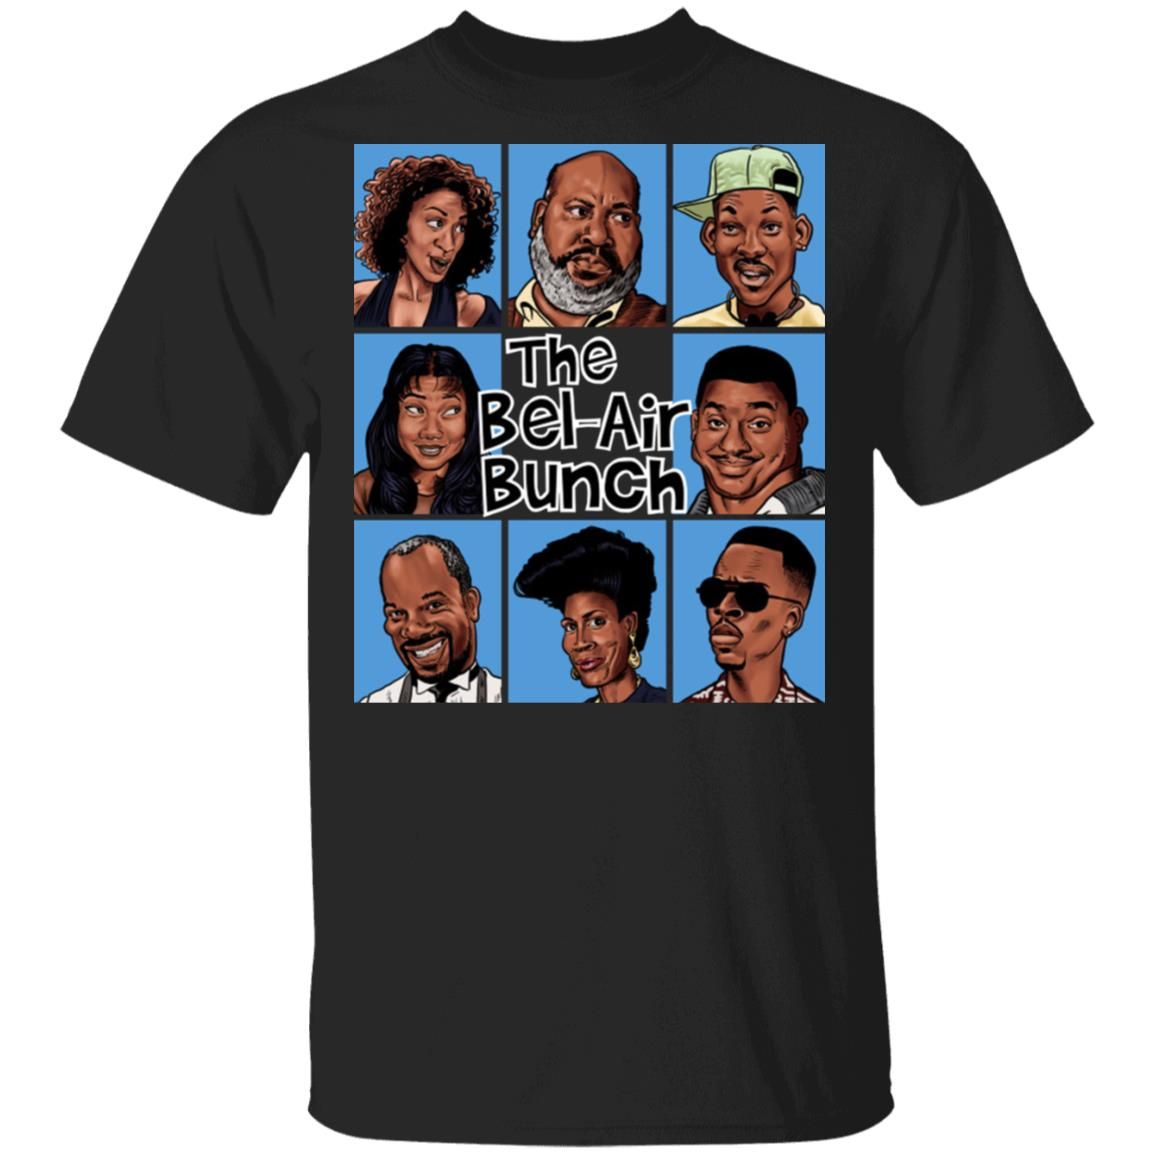 The Bel Air Bunch Fresh Prince Of Bel Air Shirt Style: Classic T-Shirt, Color: Black